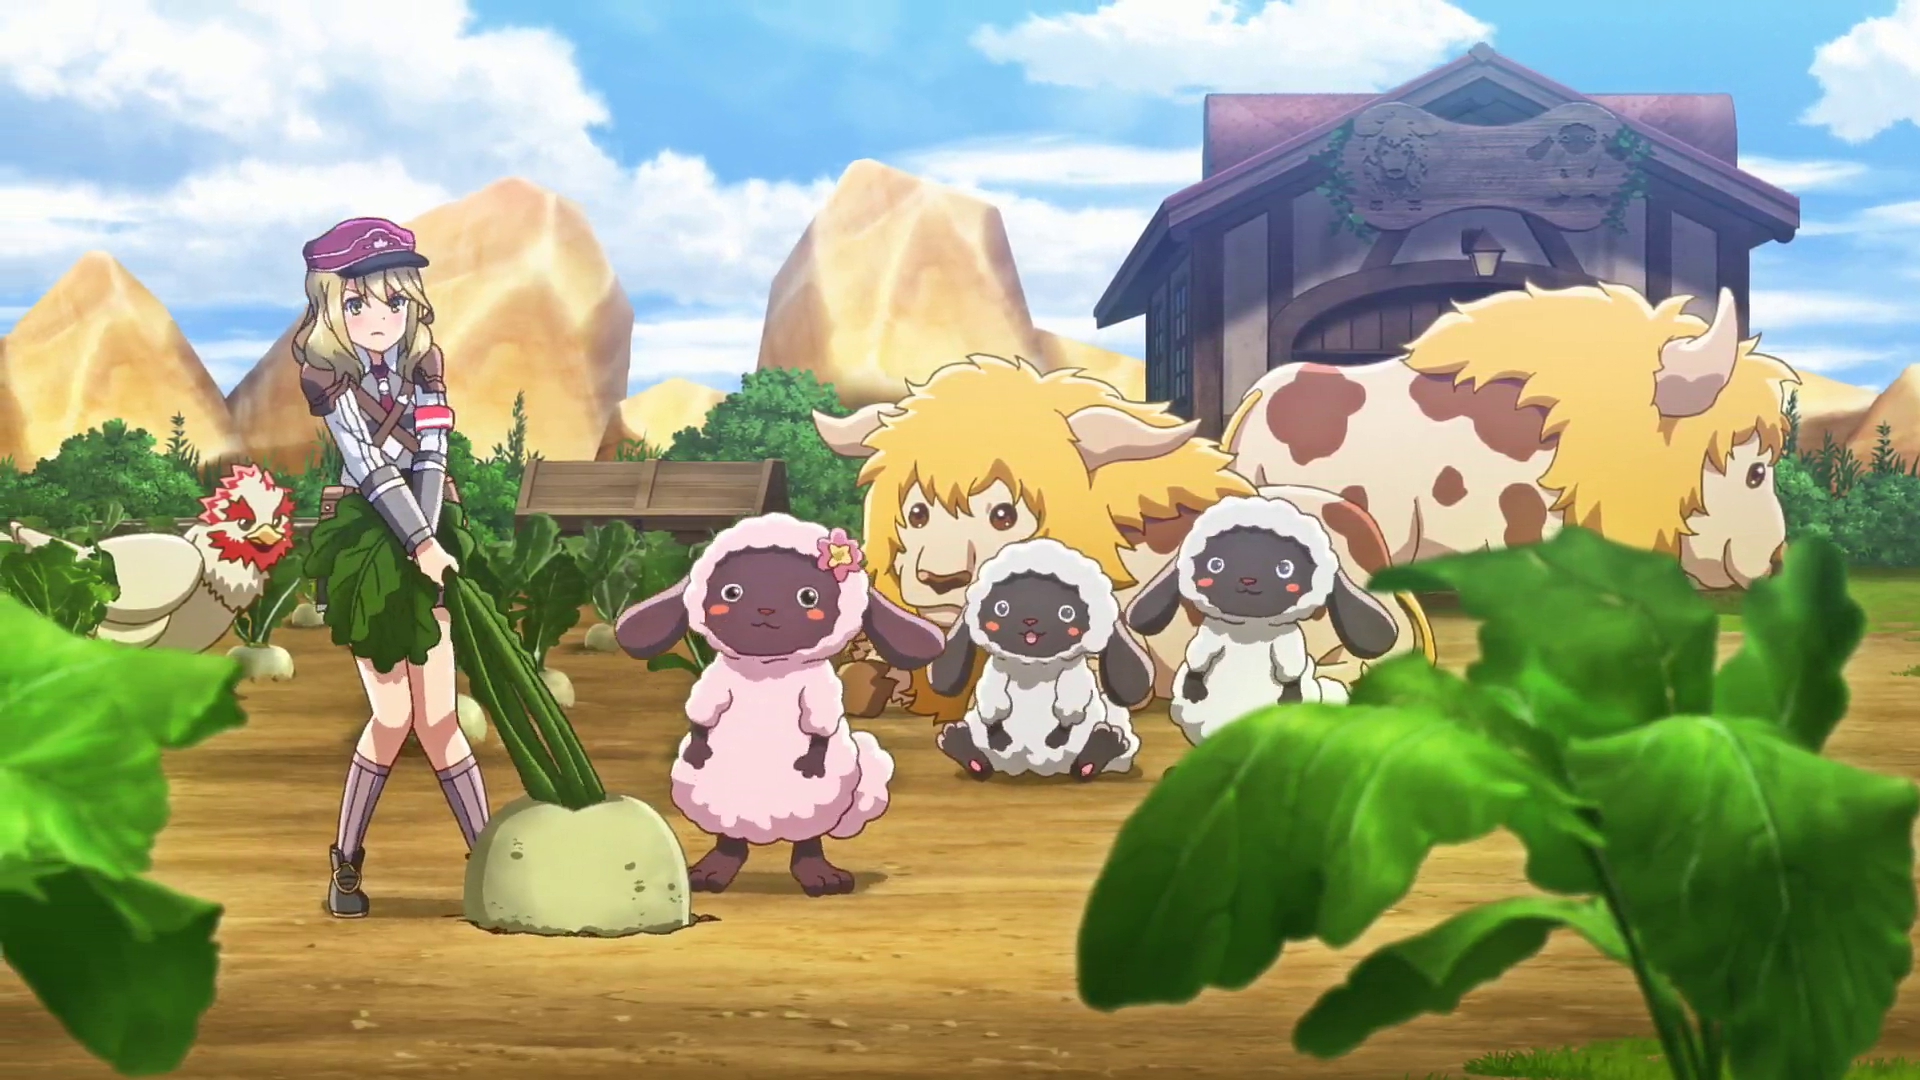 Video Game Rune Factory 5 HD Wallpaper Background Image.